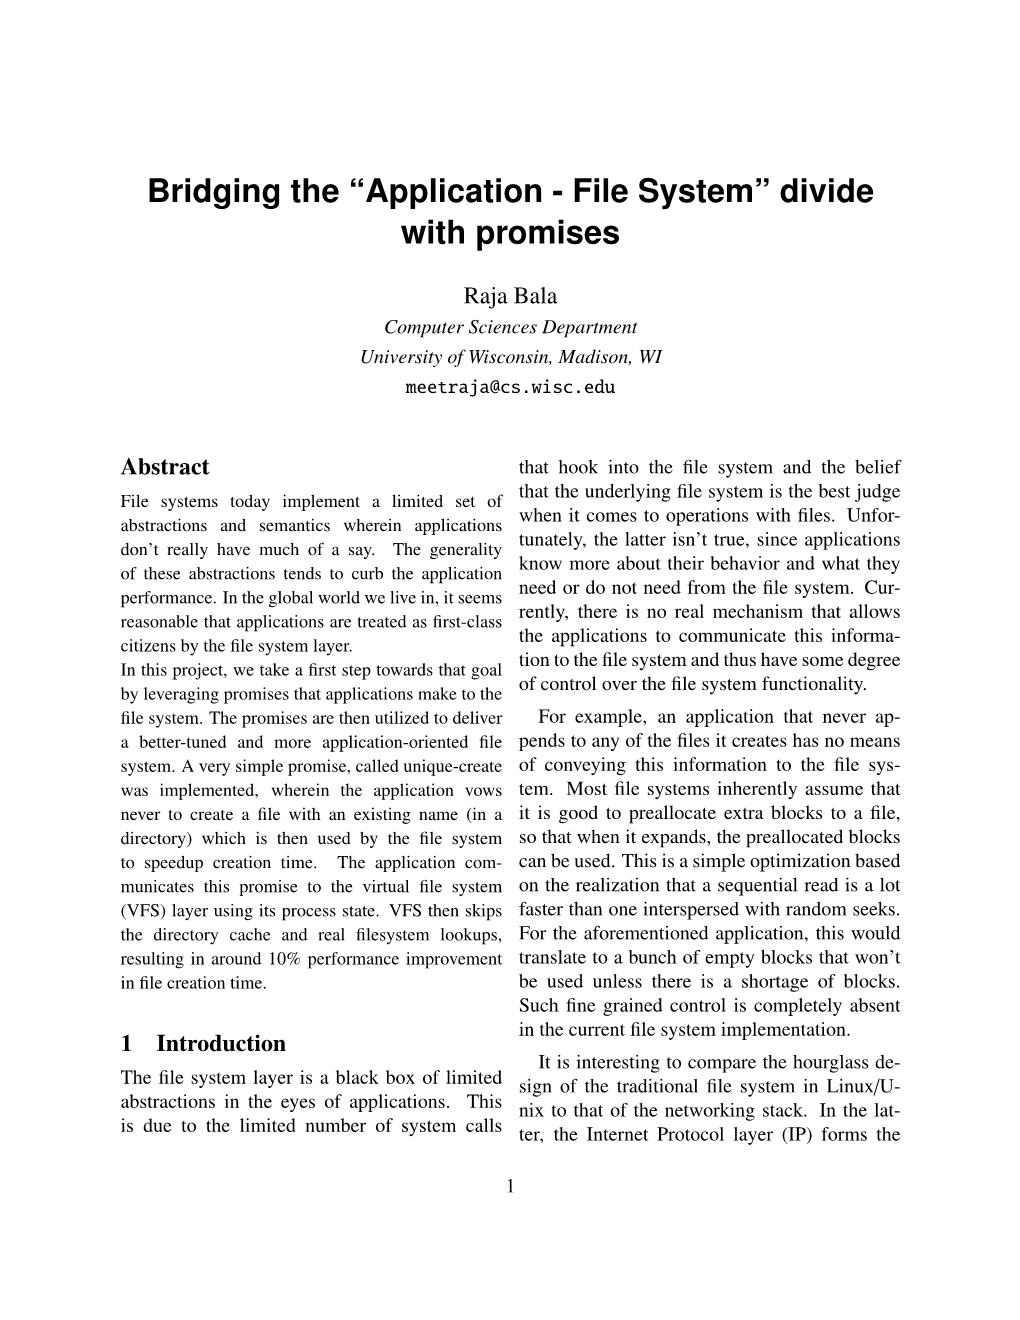 “Application - File System” Divide with Promises